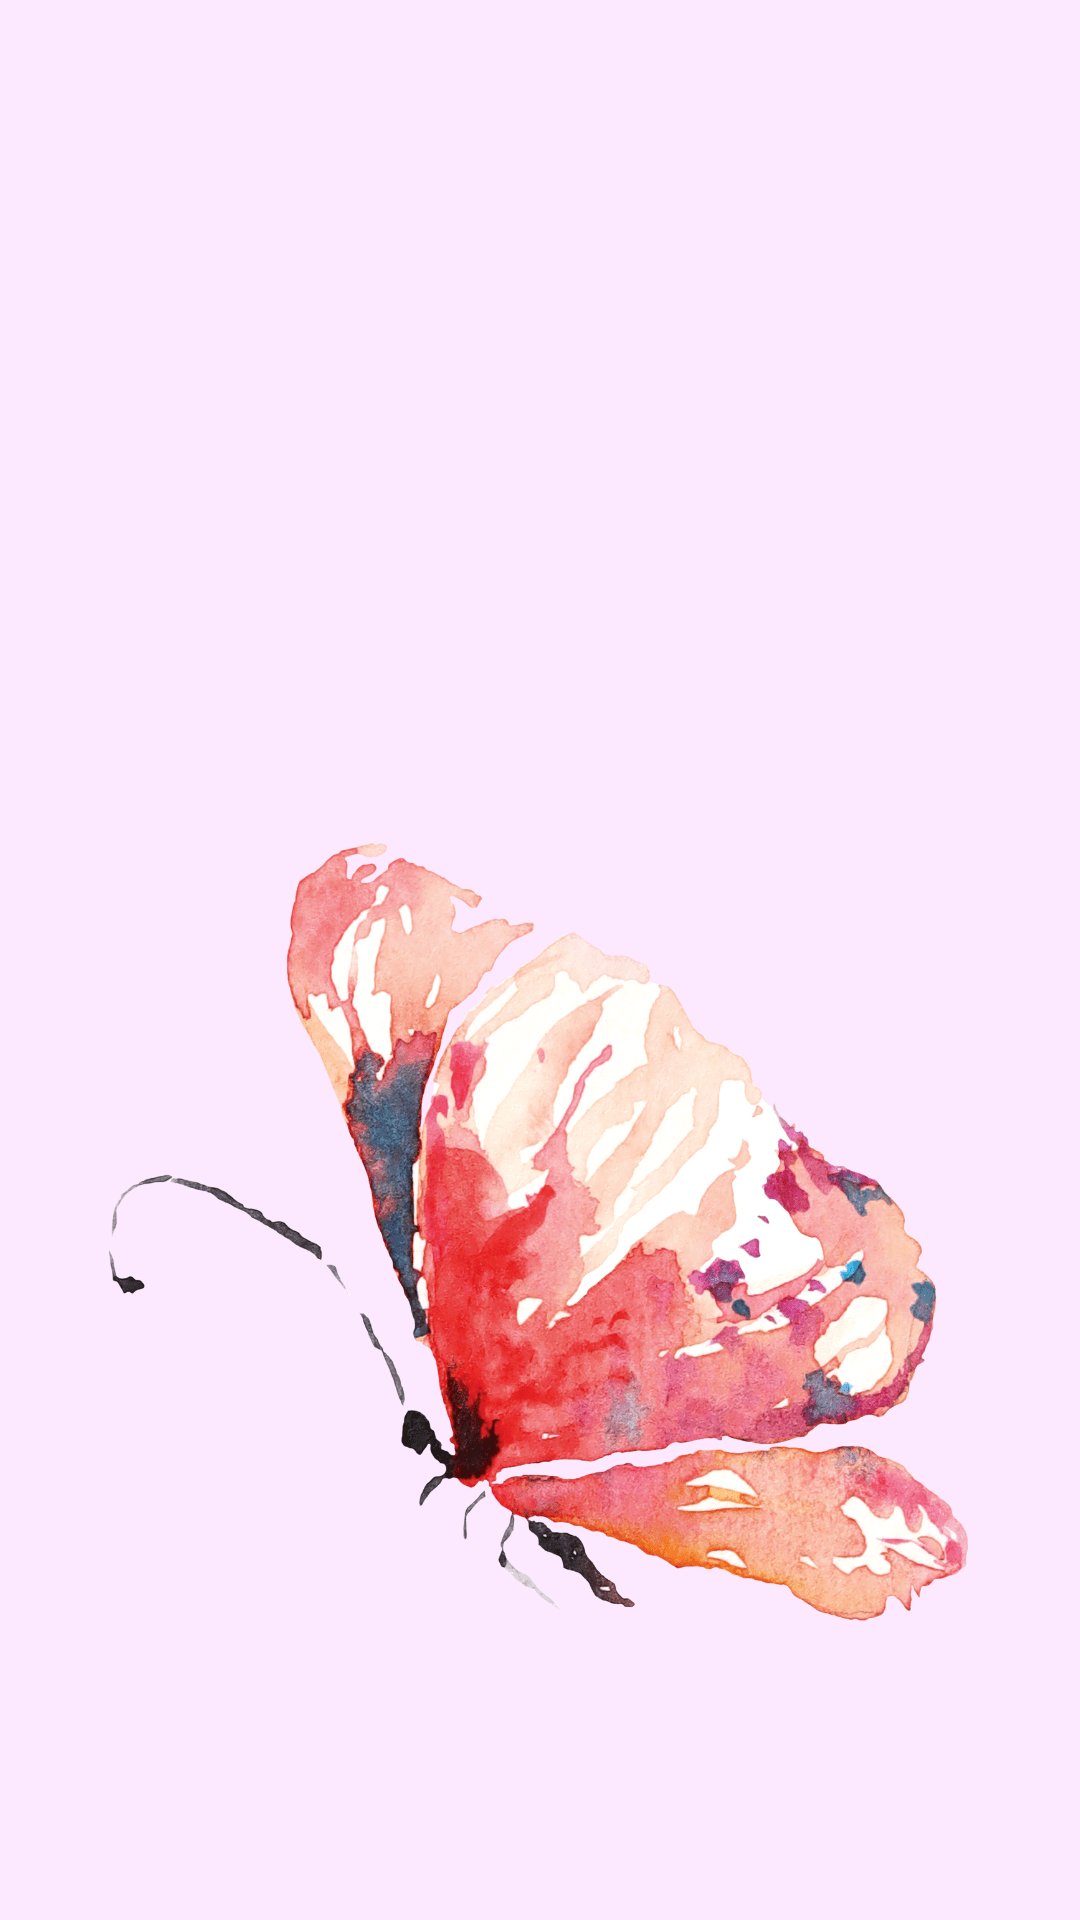 A watercolor painting of a pink butterfly on a light pink background - Butterfly